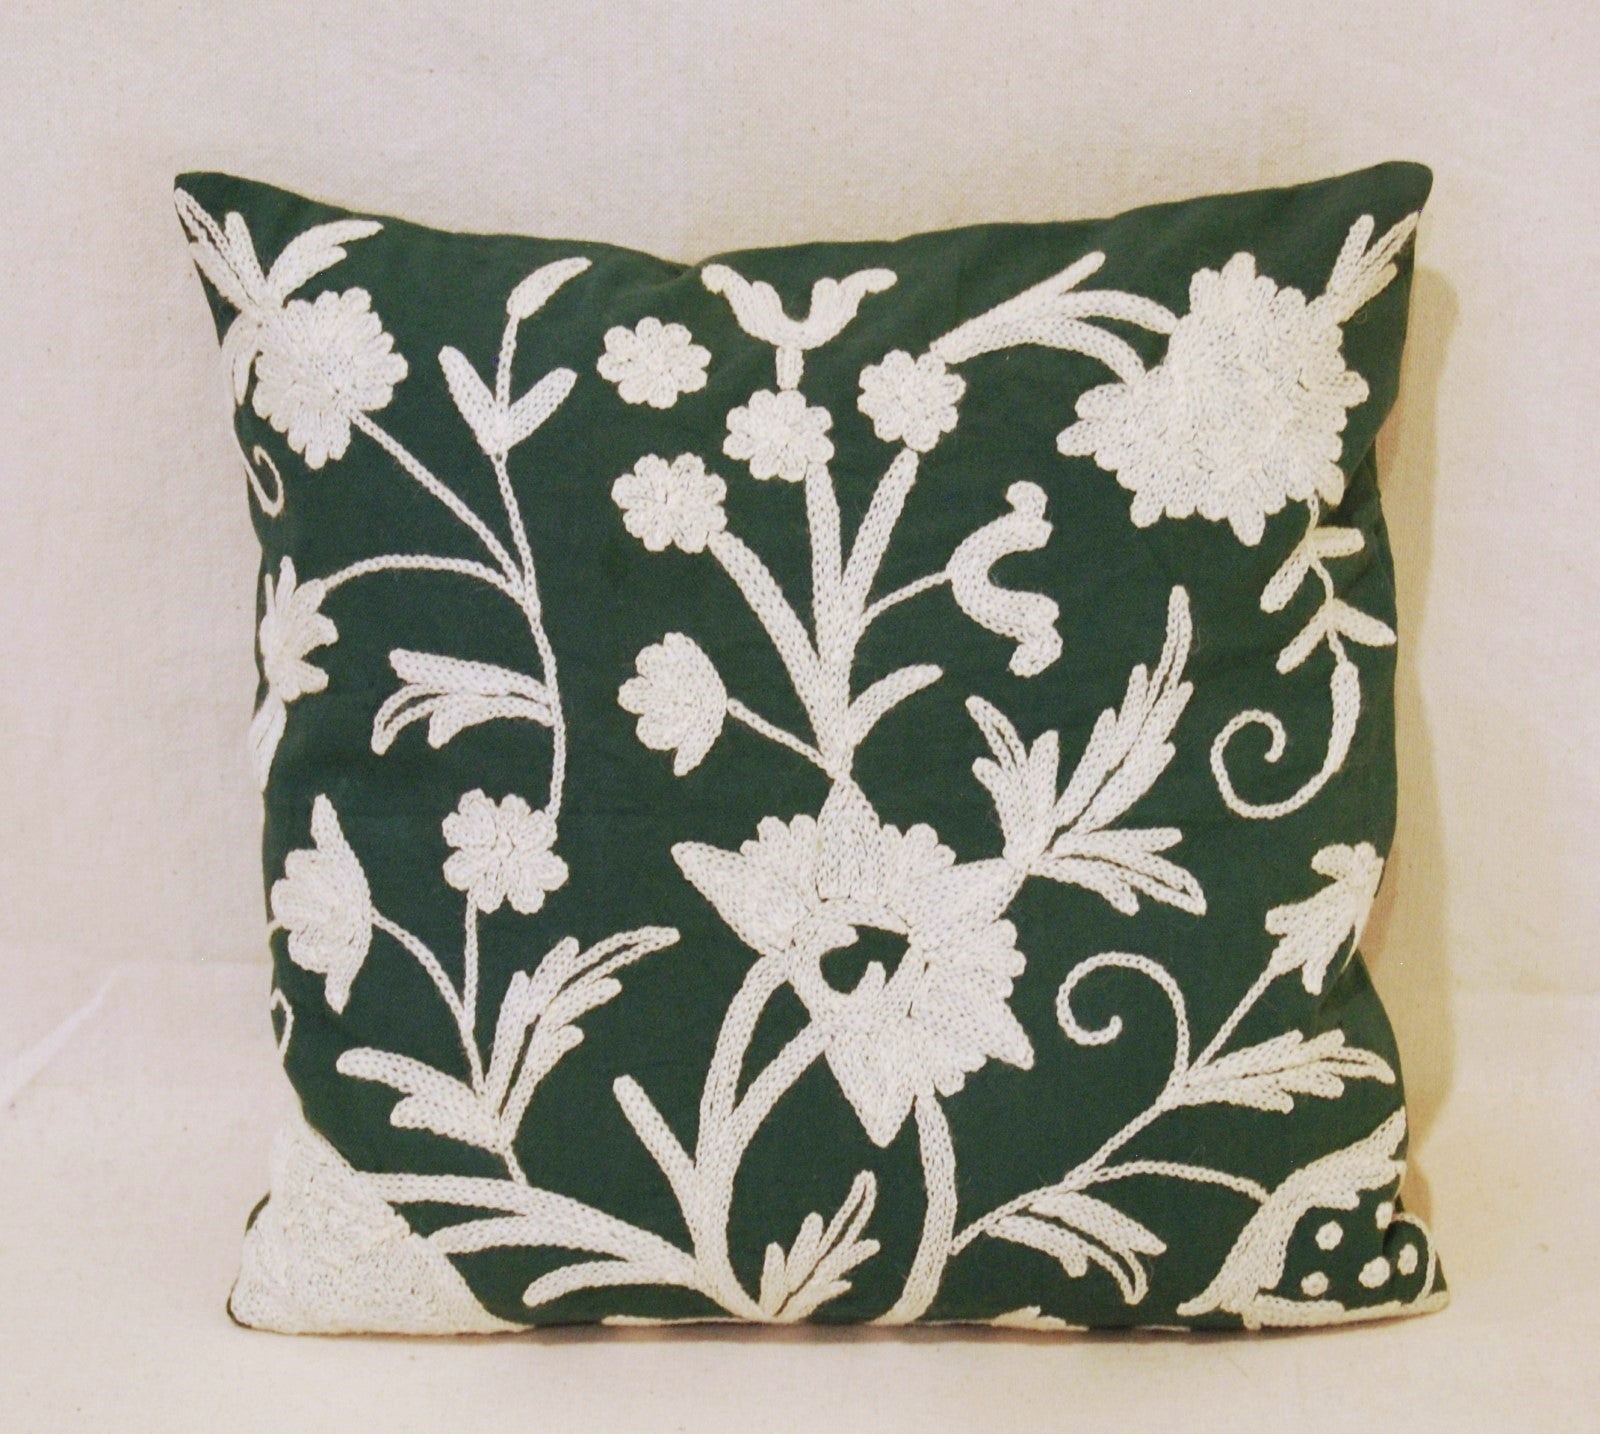 Crewel Embroidery Throw Pillowcase, Cushion Cover "Tree of Life", White on Green #CW451